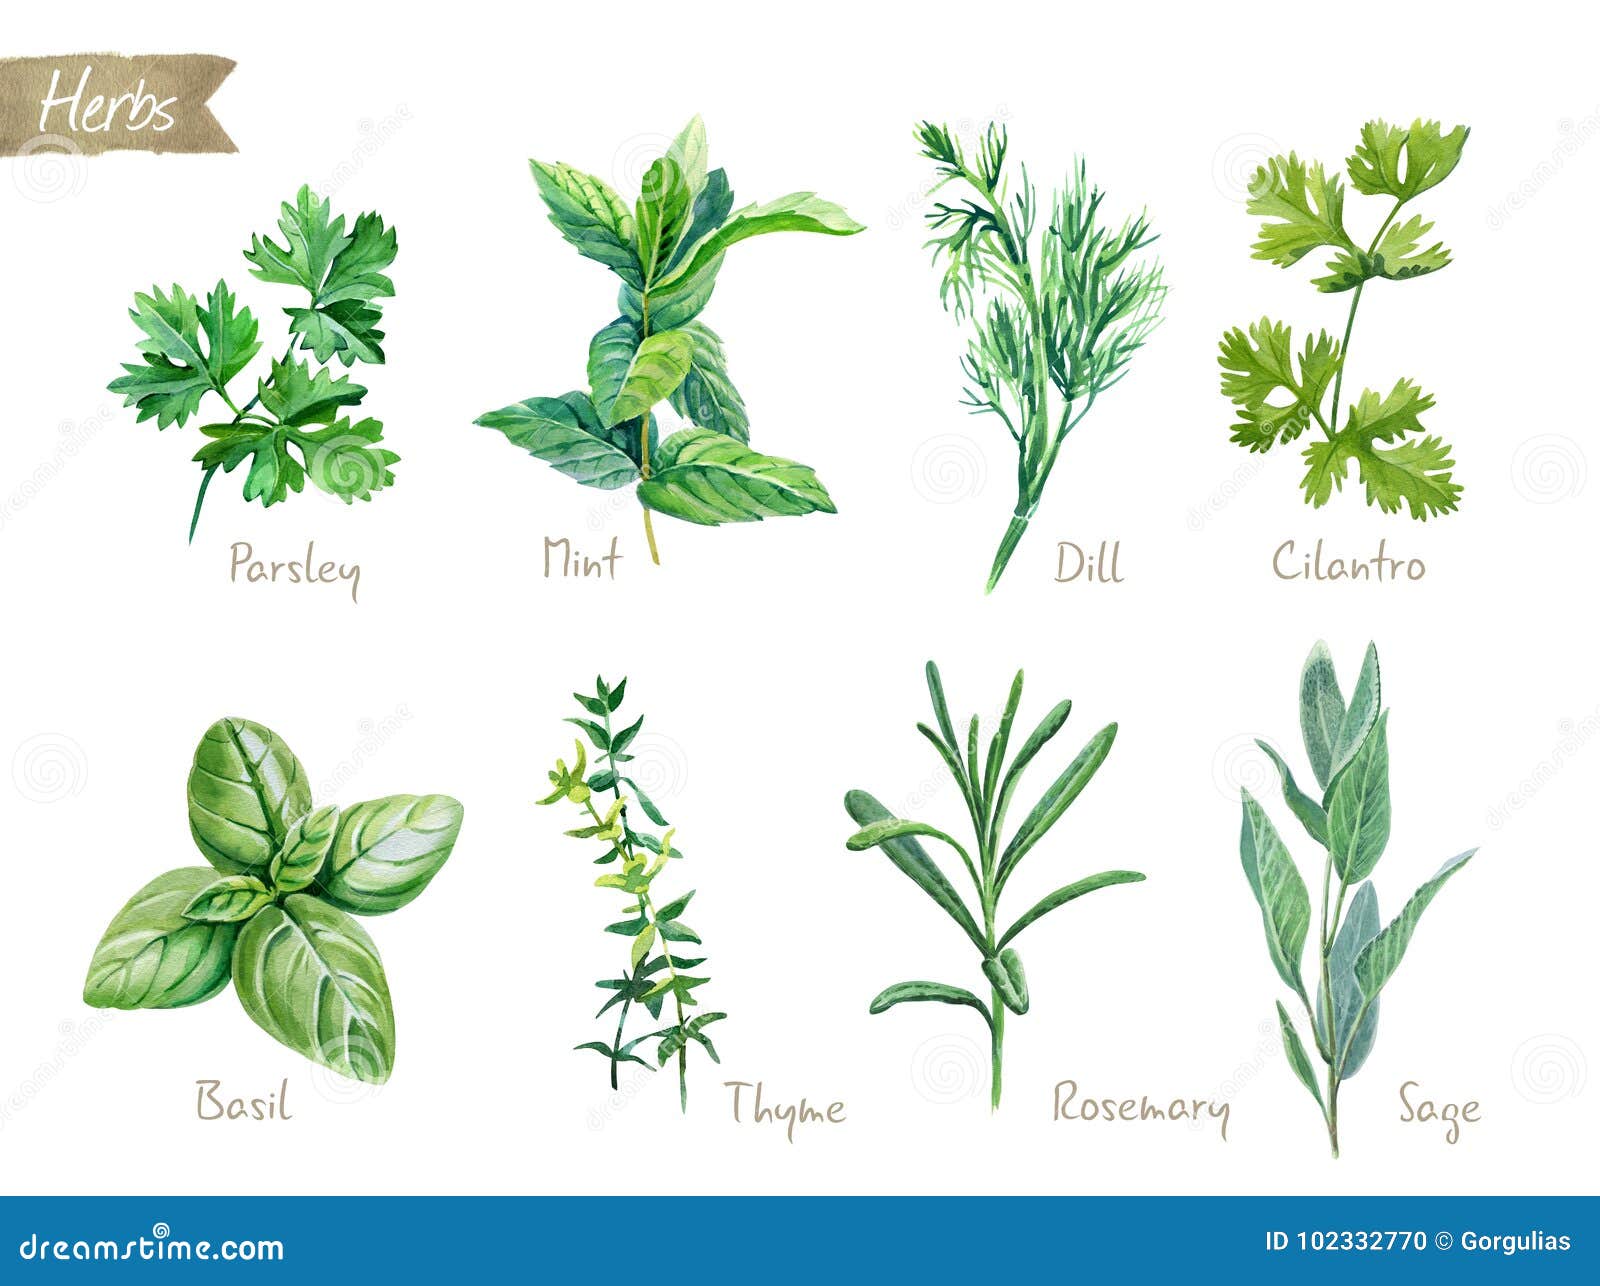 culinary herbs collection watercolor  with clipping paths